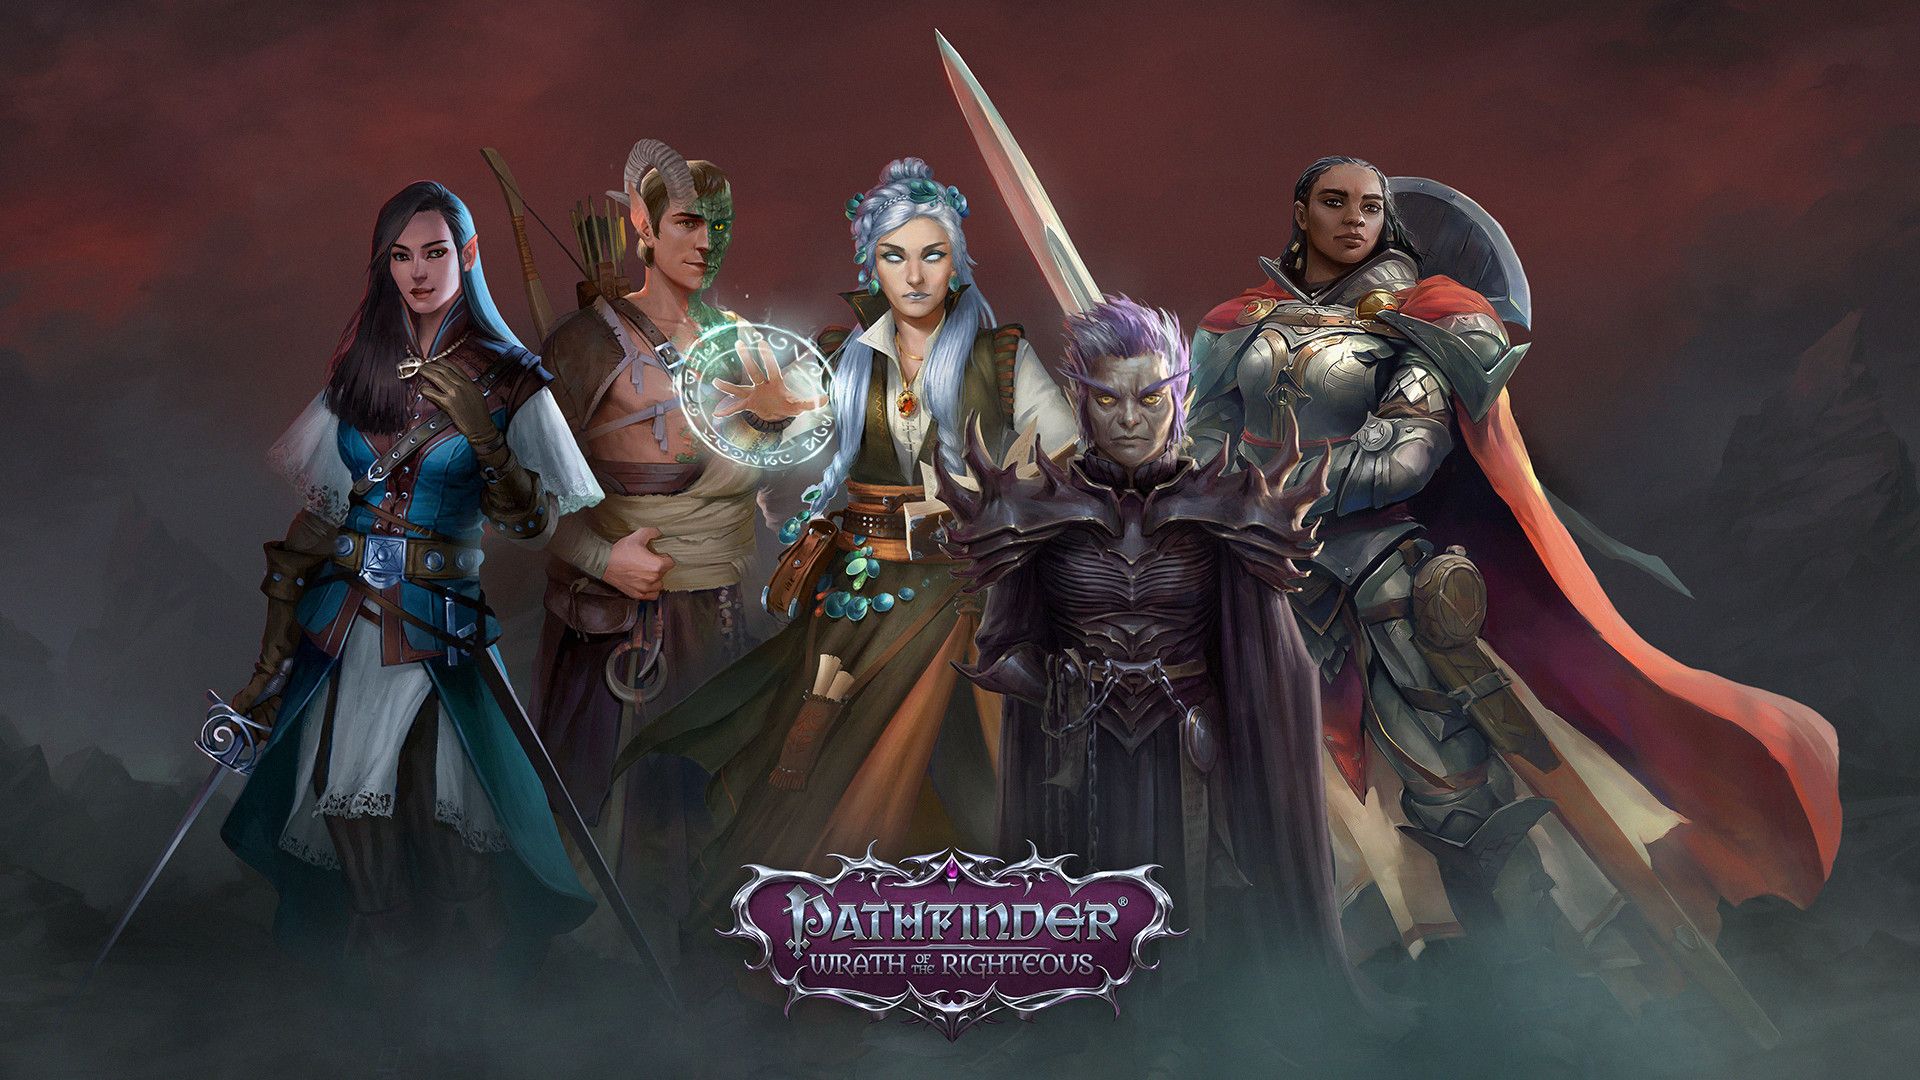 Pathfinder Wrath of the Righteous Update 1.0.1c patch notes Today – September 6, 2021